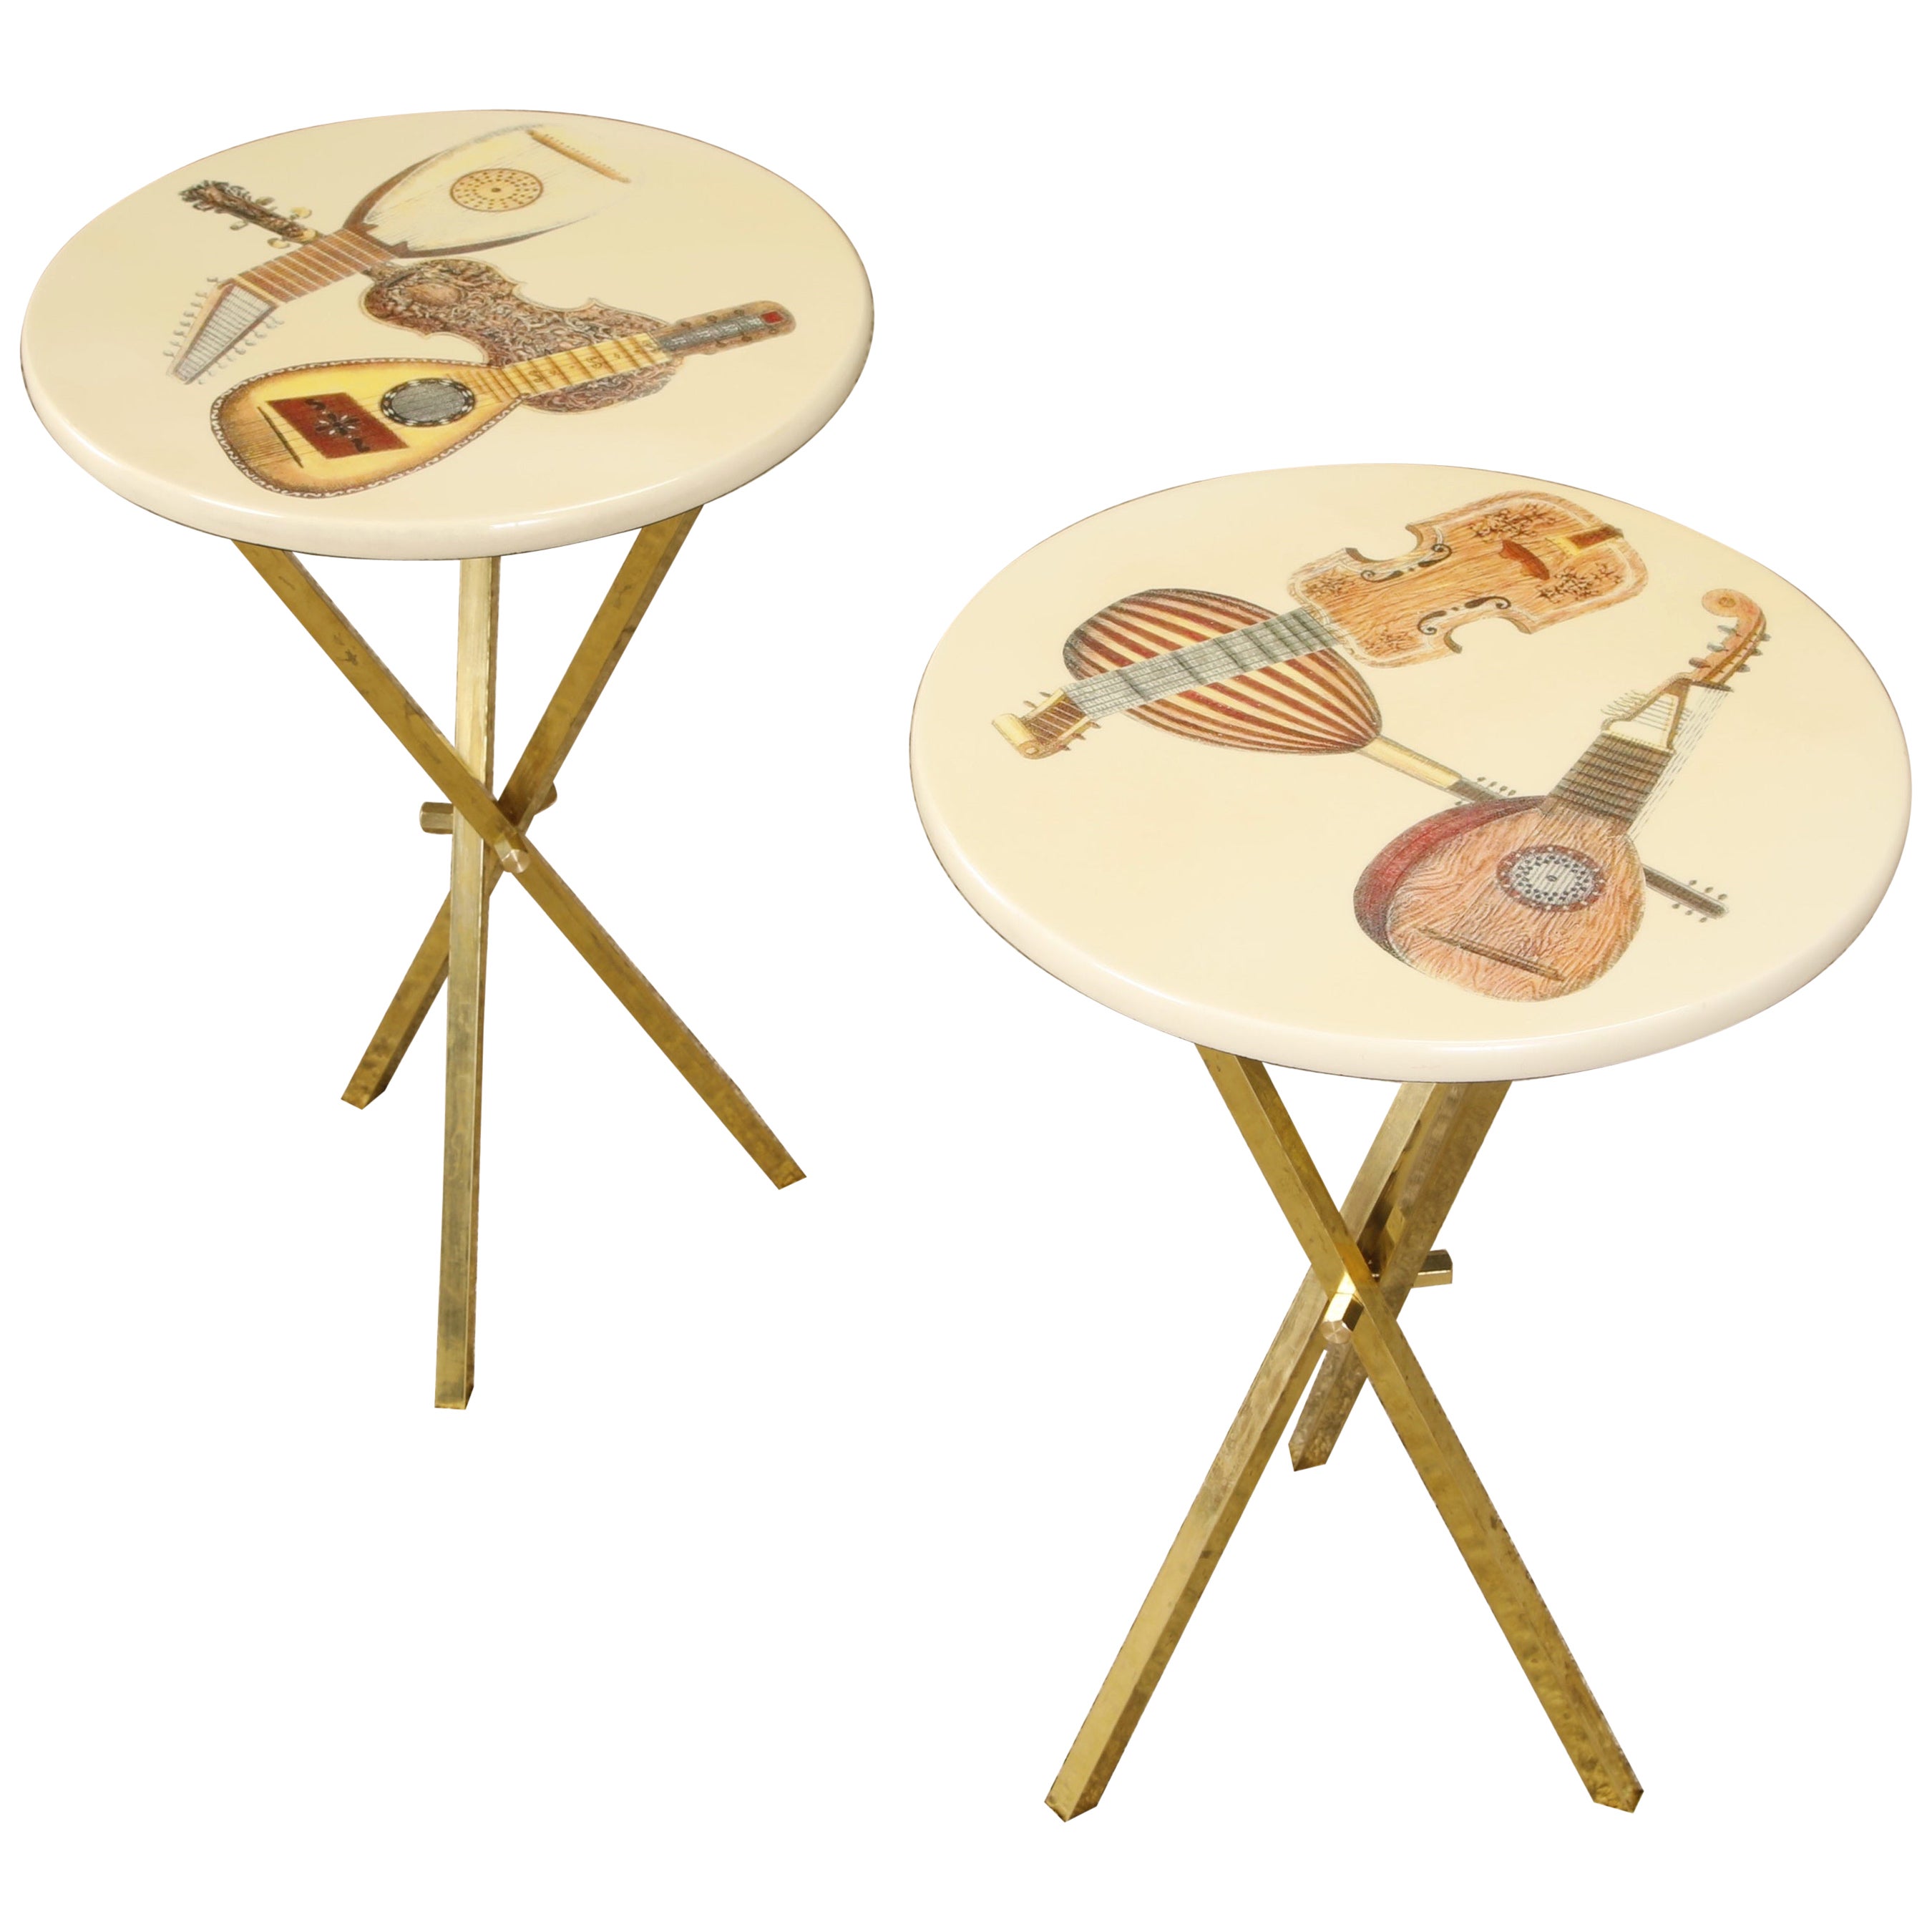 'Strumenti Musicali' Drinks / Side Tables by Piero Fornasetti, c 1970s, Signed